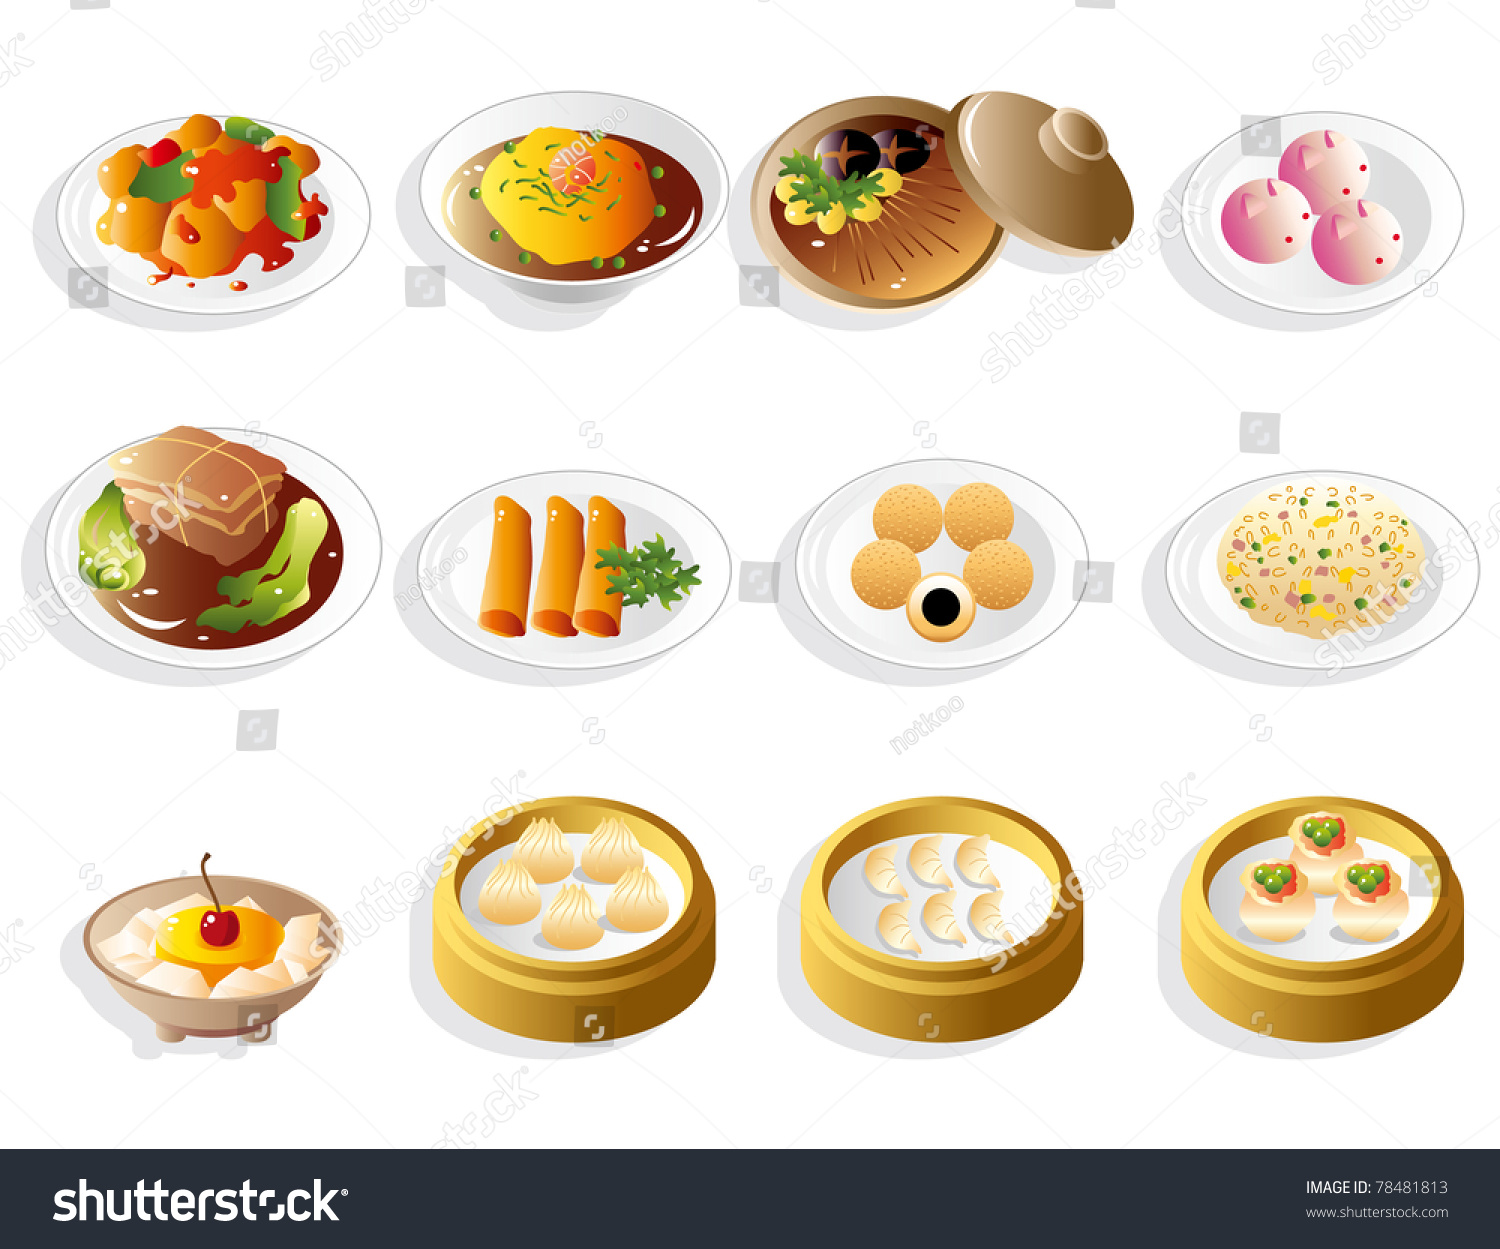 Cartoon Chinese Food Icon Set Stock Vector 78481813 - Shutterstock